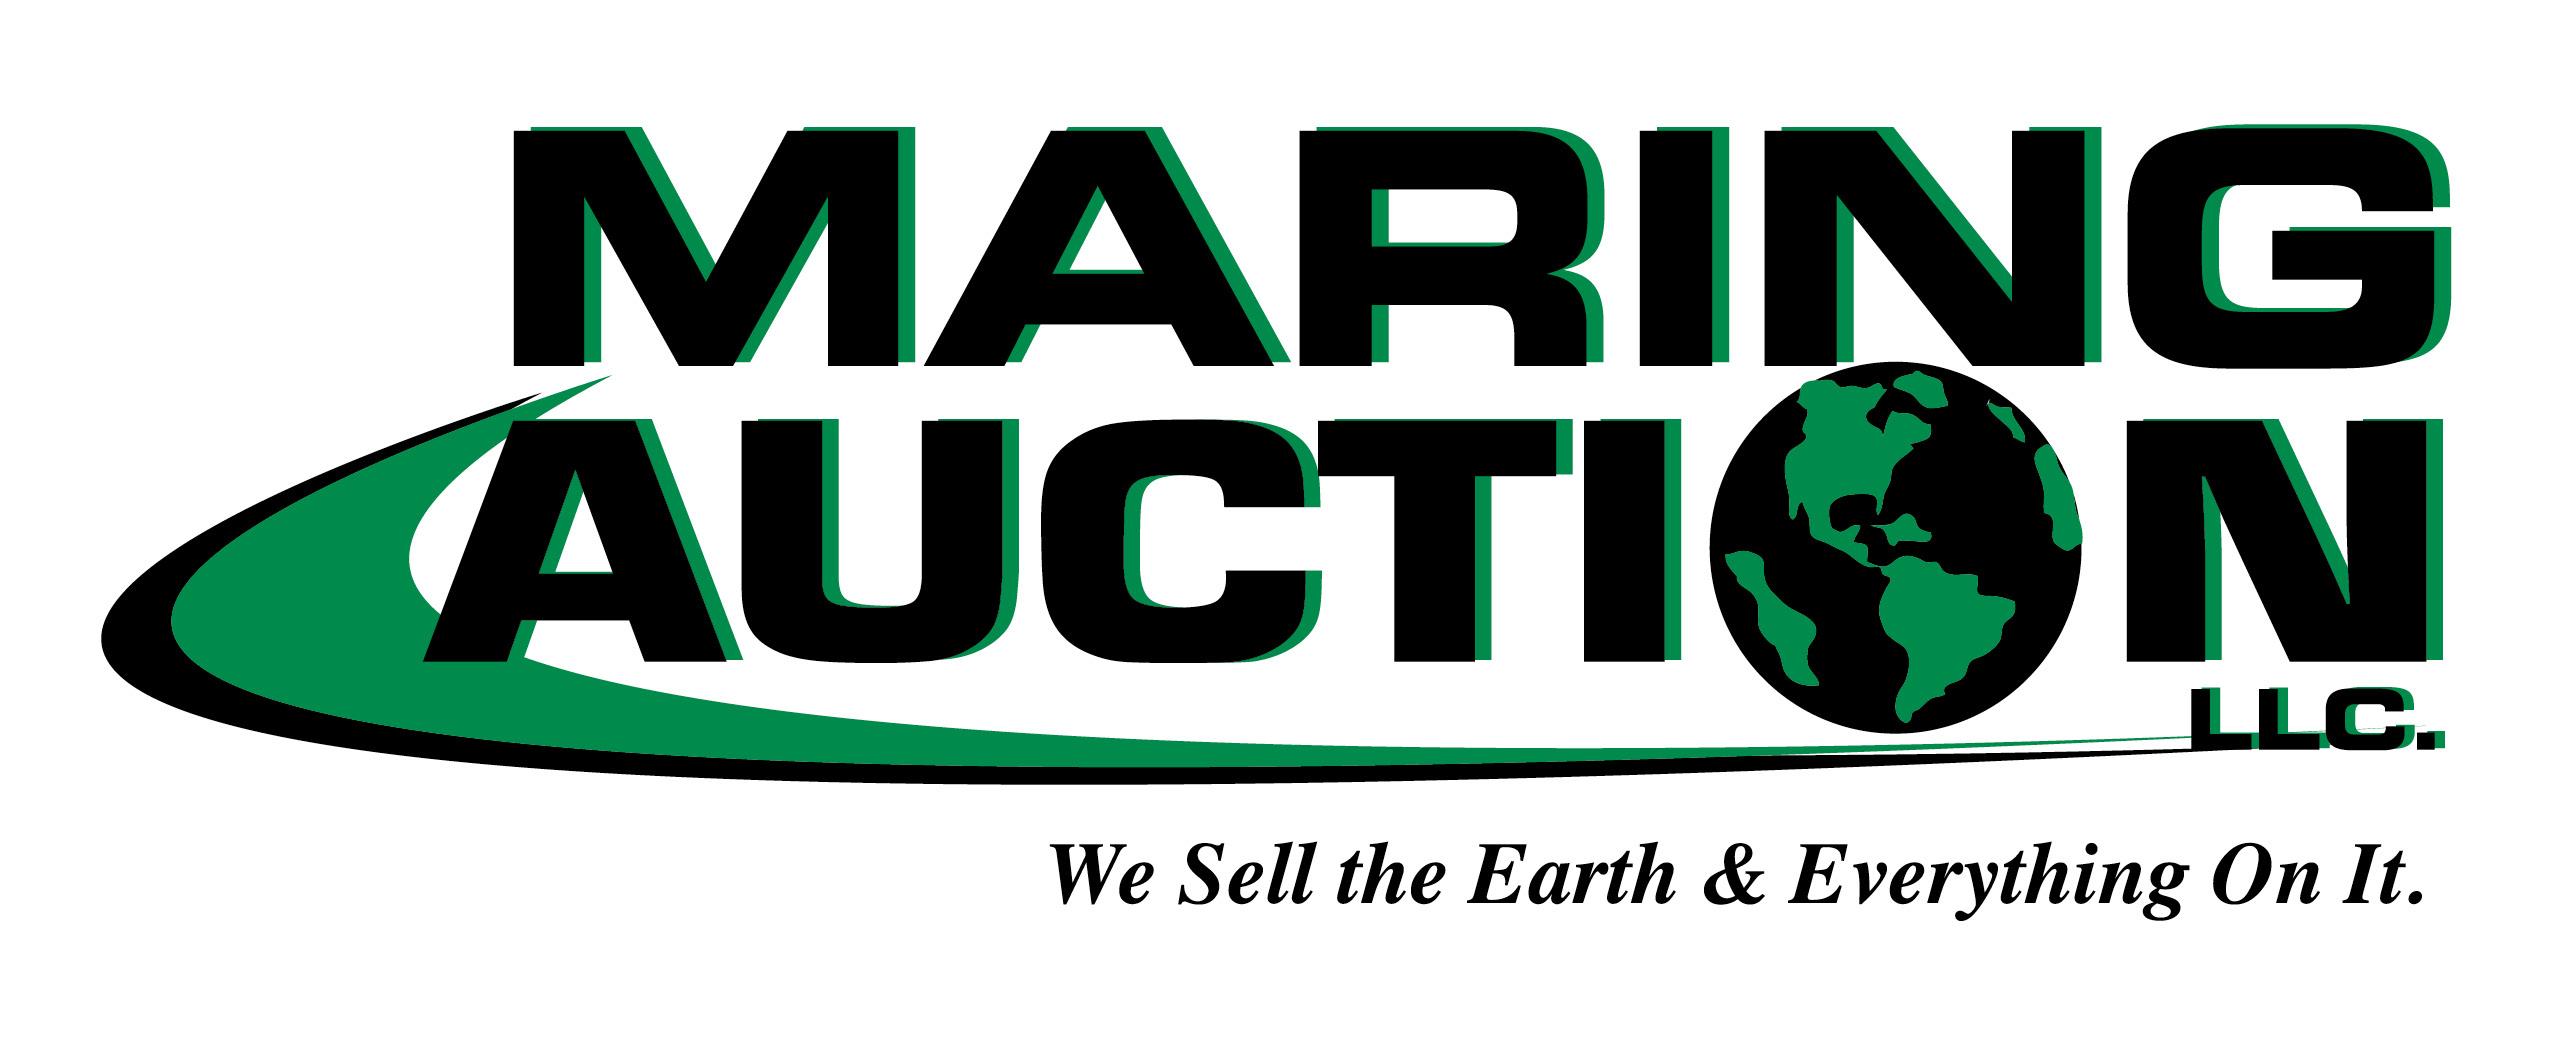 Maring Auction Co. Inc